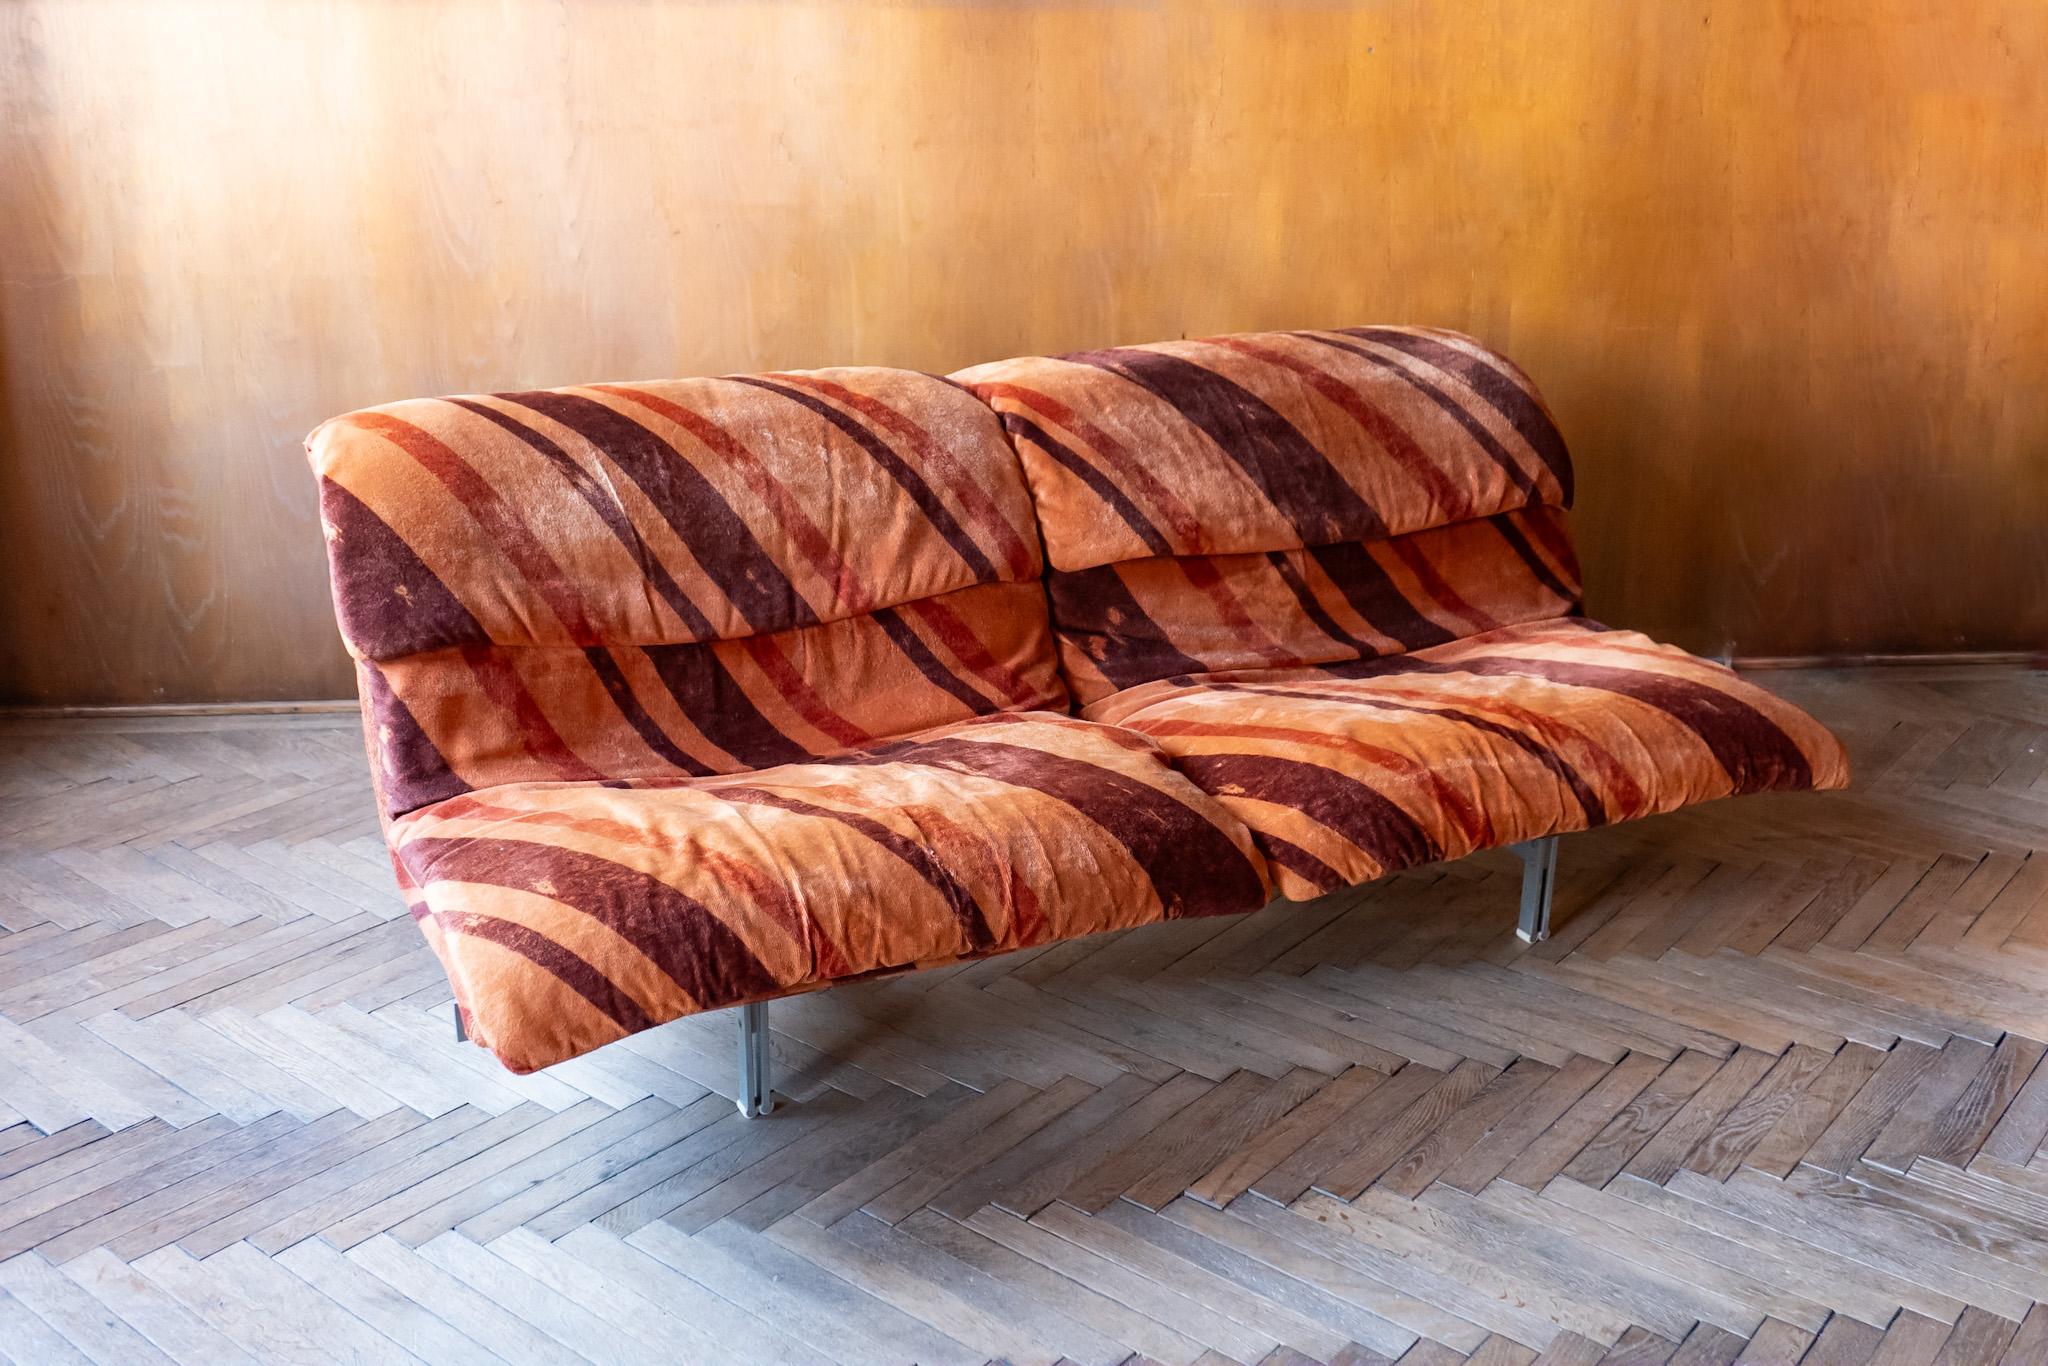 Mid-Century Modern Orange Velvet Sofa by Gianni Offredi for Saporiti, Italy 1970s.

Designed in 1974 by Giovanni Offredi this 2-seater sofa “Wave” in originial upholstery from the 70s is still one of the classic of the Saporiti Italia collection.